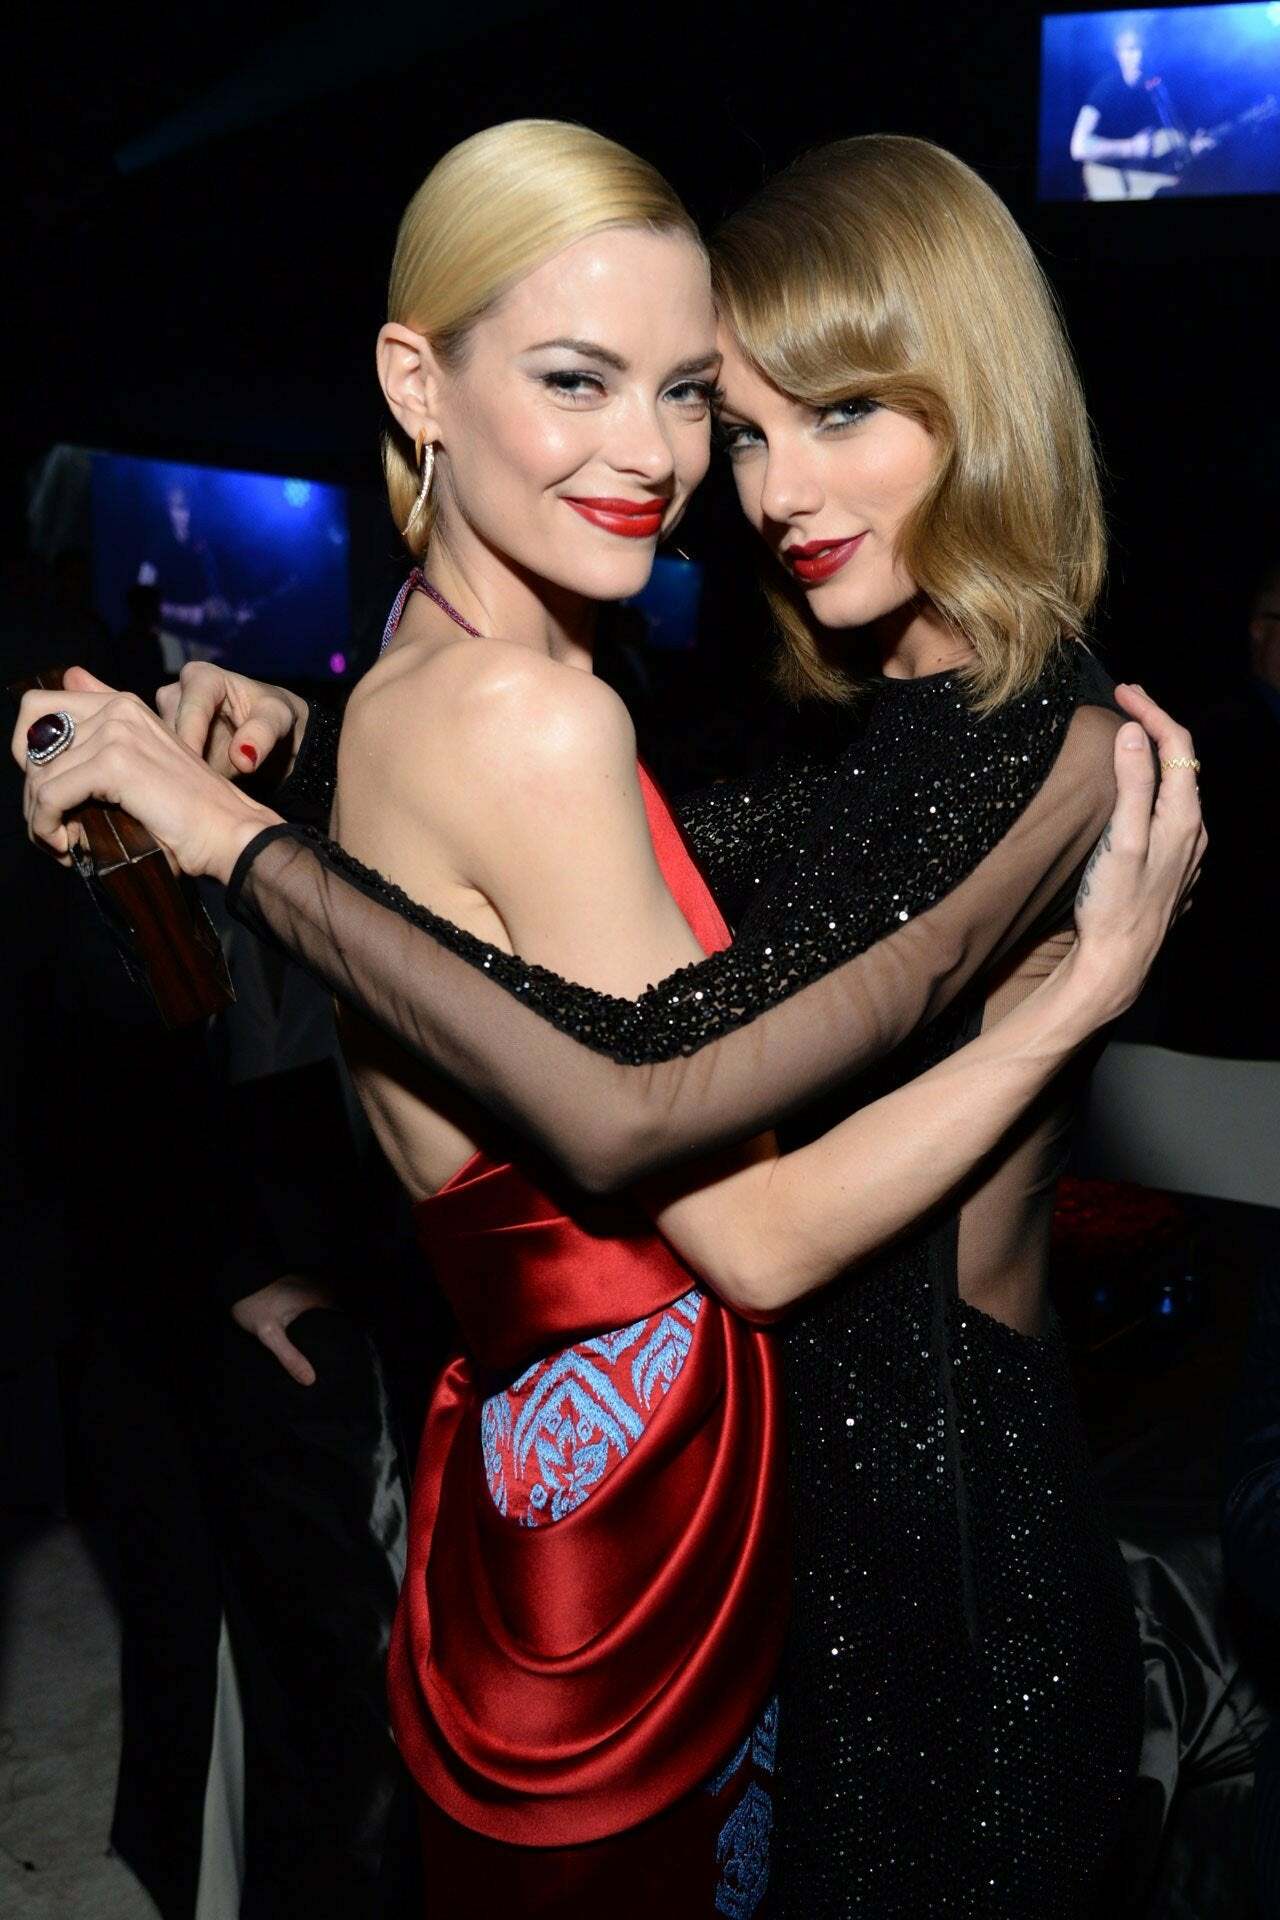 Jamie King and Taylor Swift want to share your dick